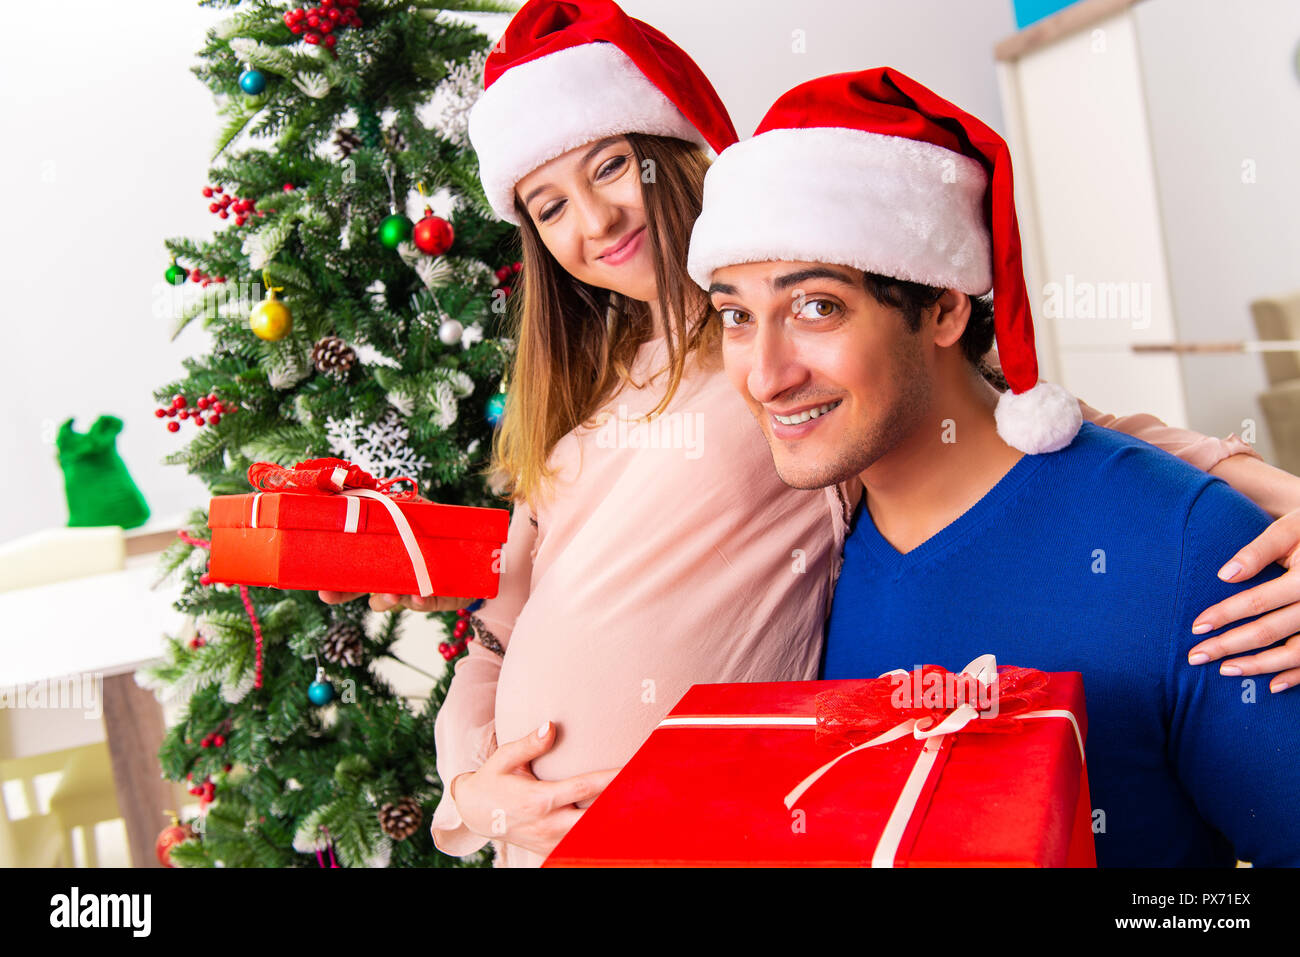 what to get pregnant wife for christmas